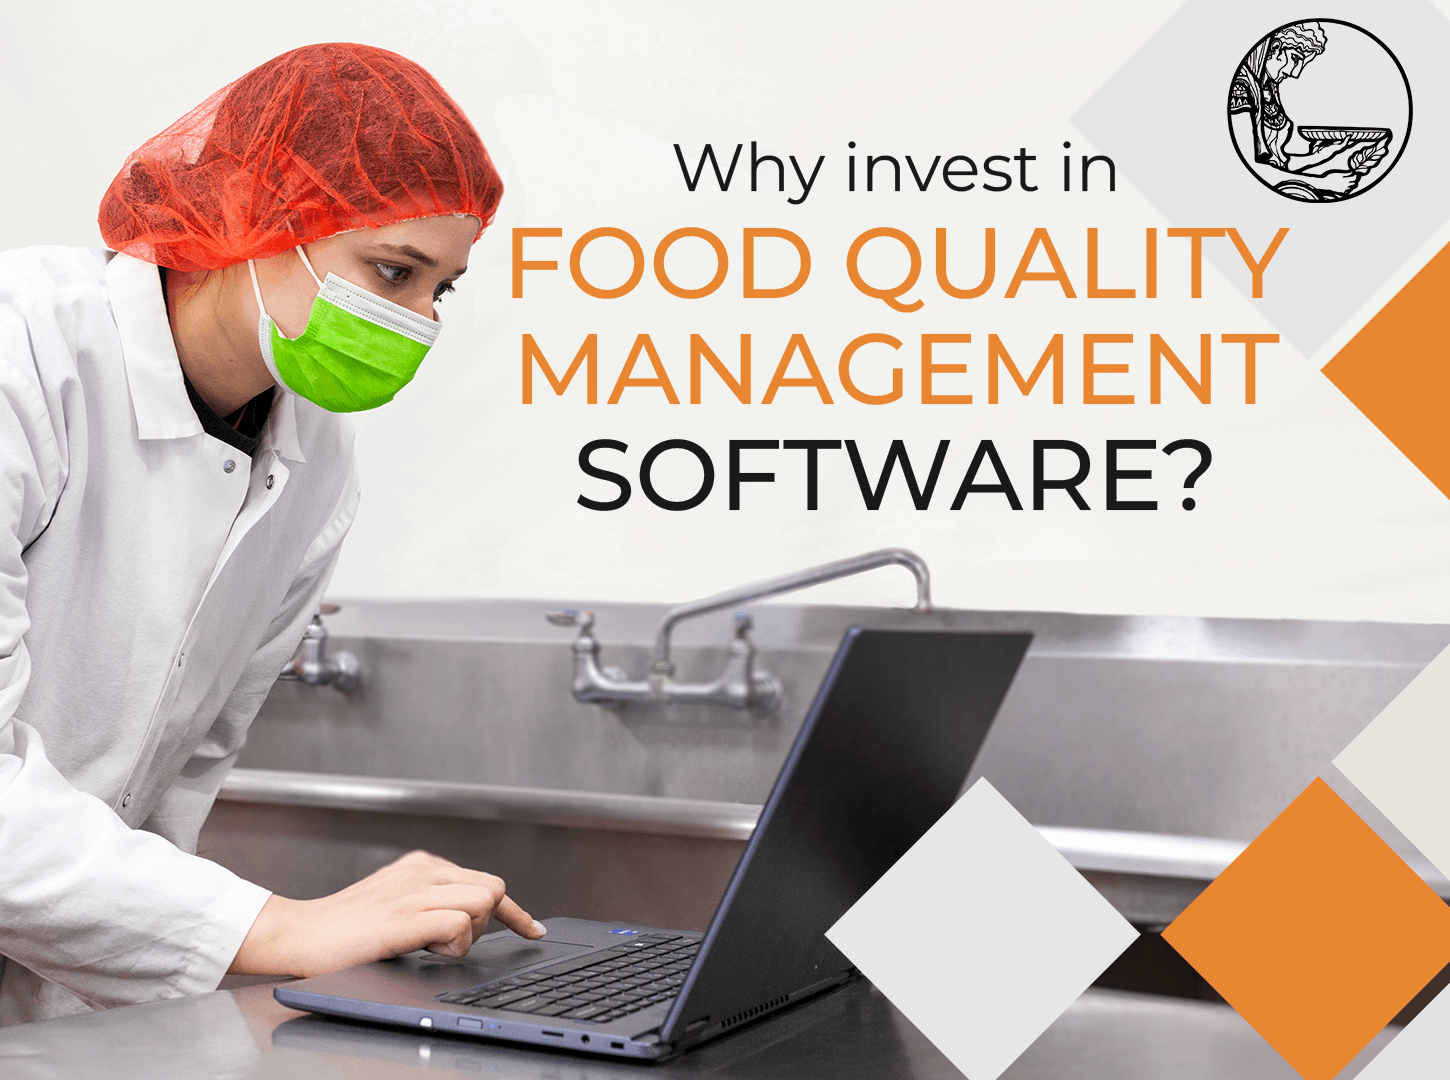 Featured image for “Why invest in Food Quality Management Software?”